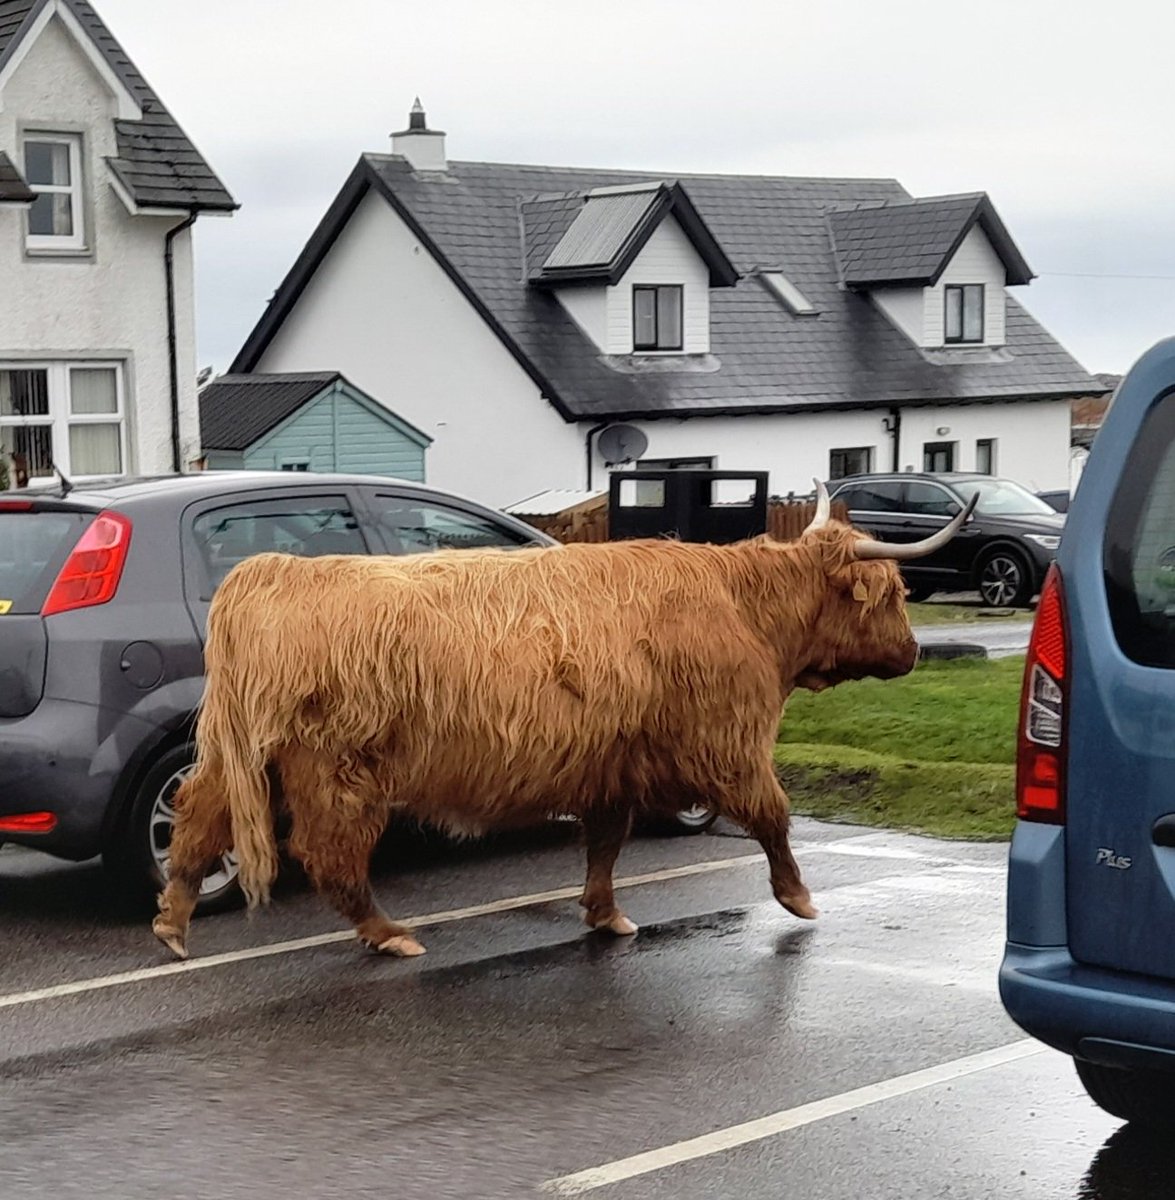 Early morning traffic in Fionnphort this morning. Heavy on the horns...